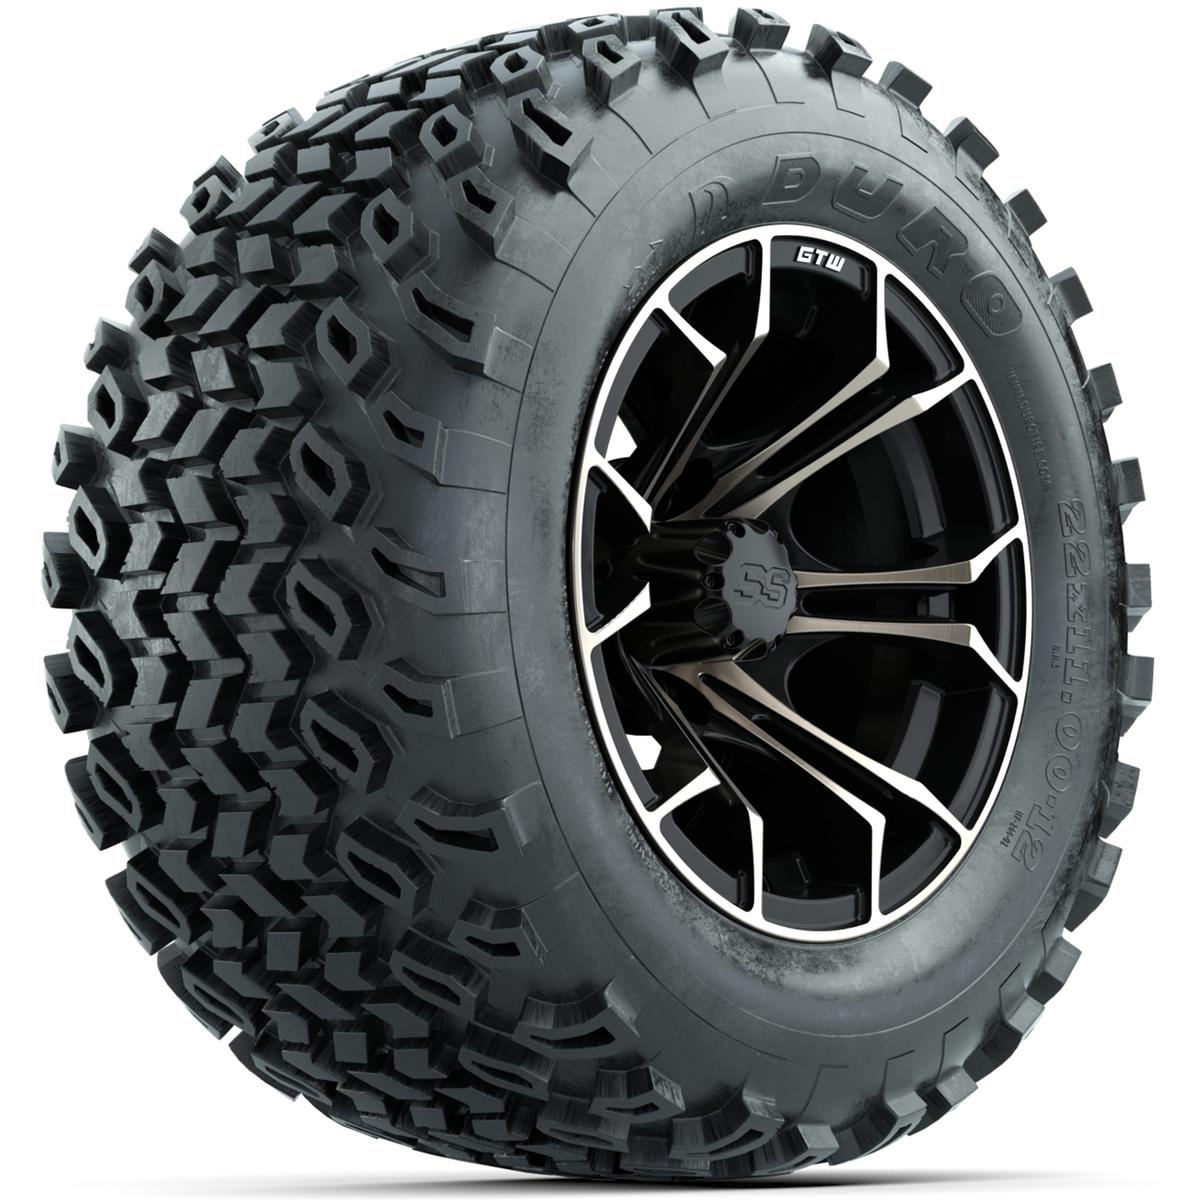 Set of (4) 12 in GTW Spyder Wheels with 22x11-12 Duro Desert All-Terrain Tires